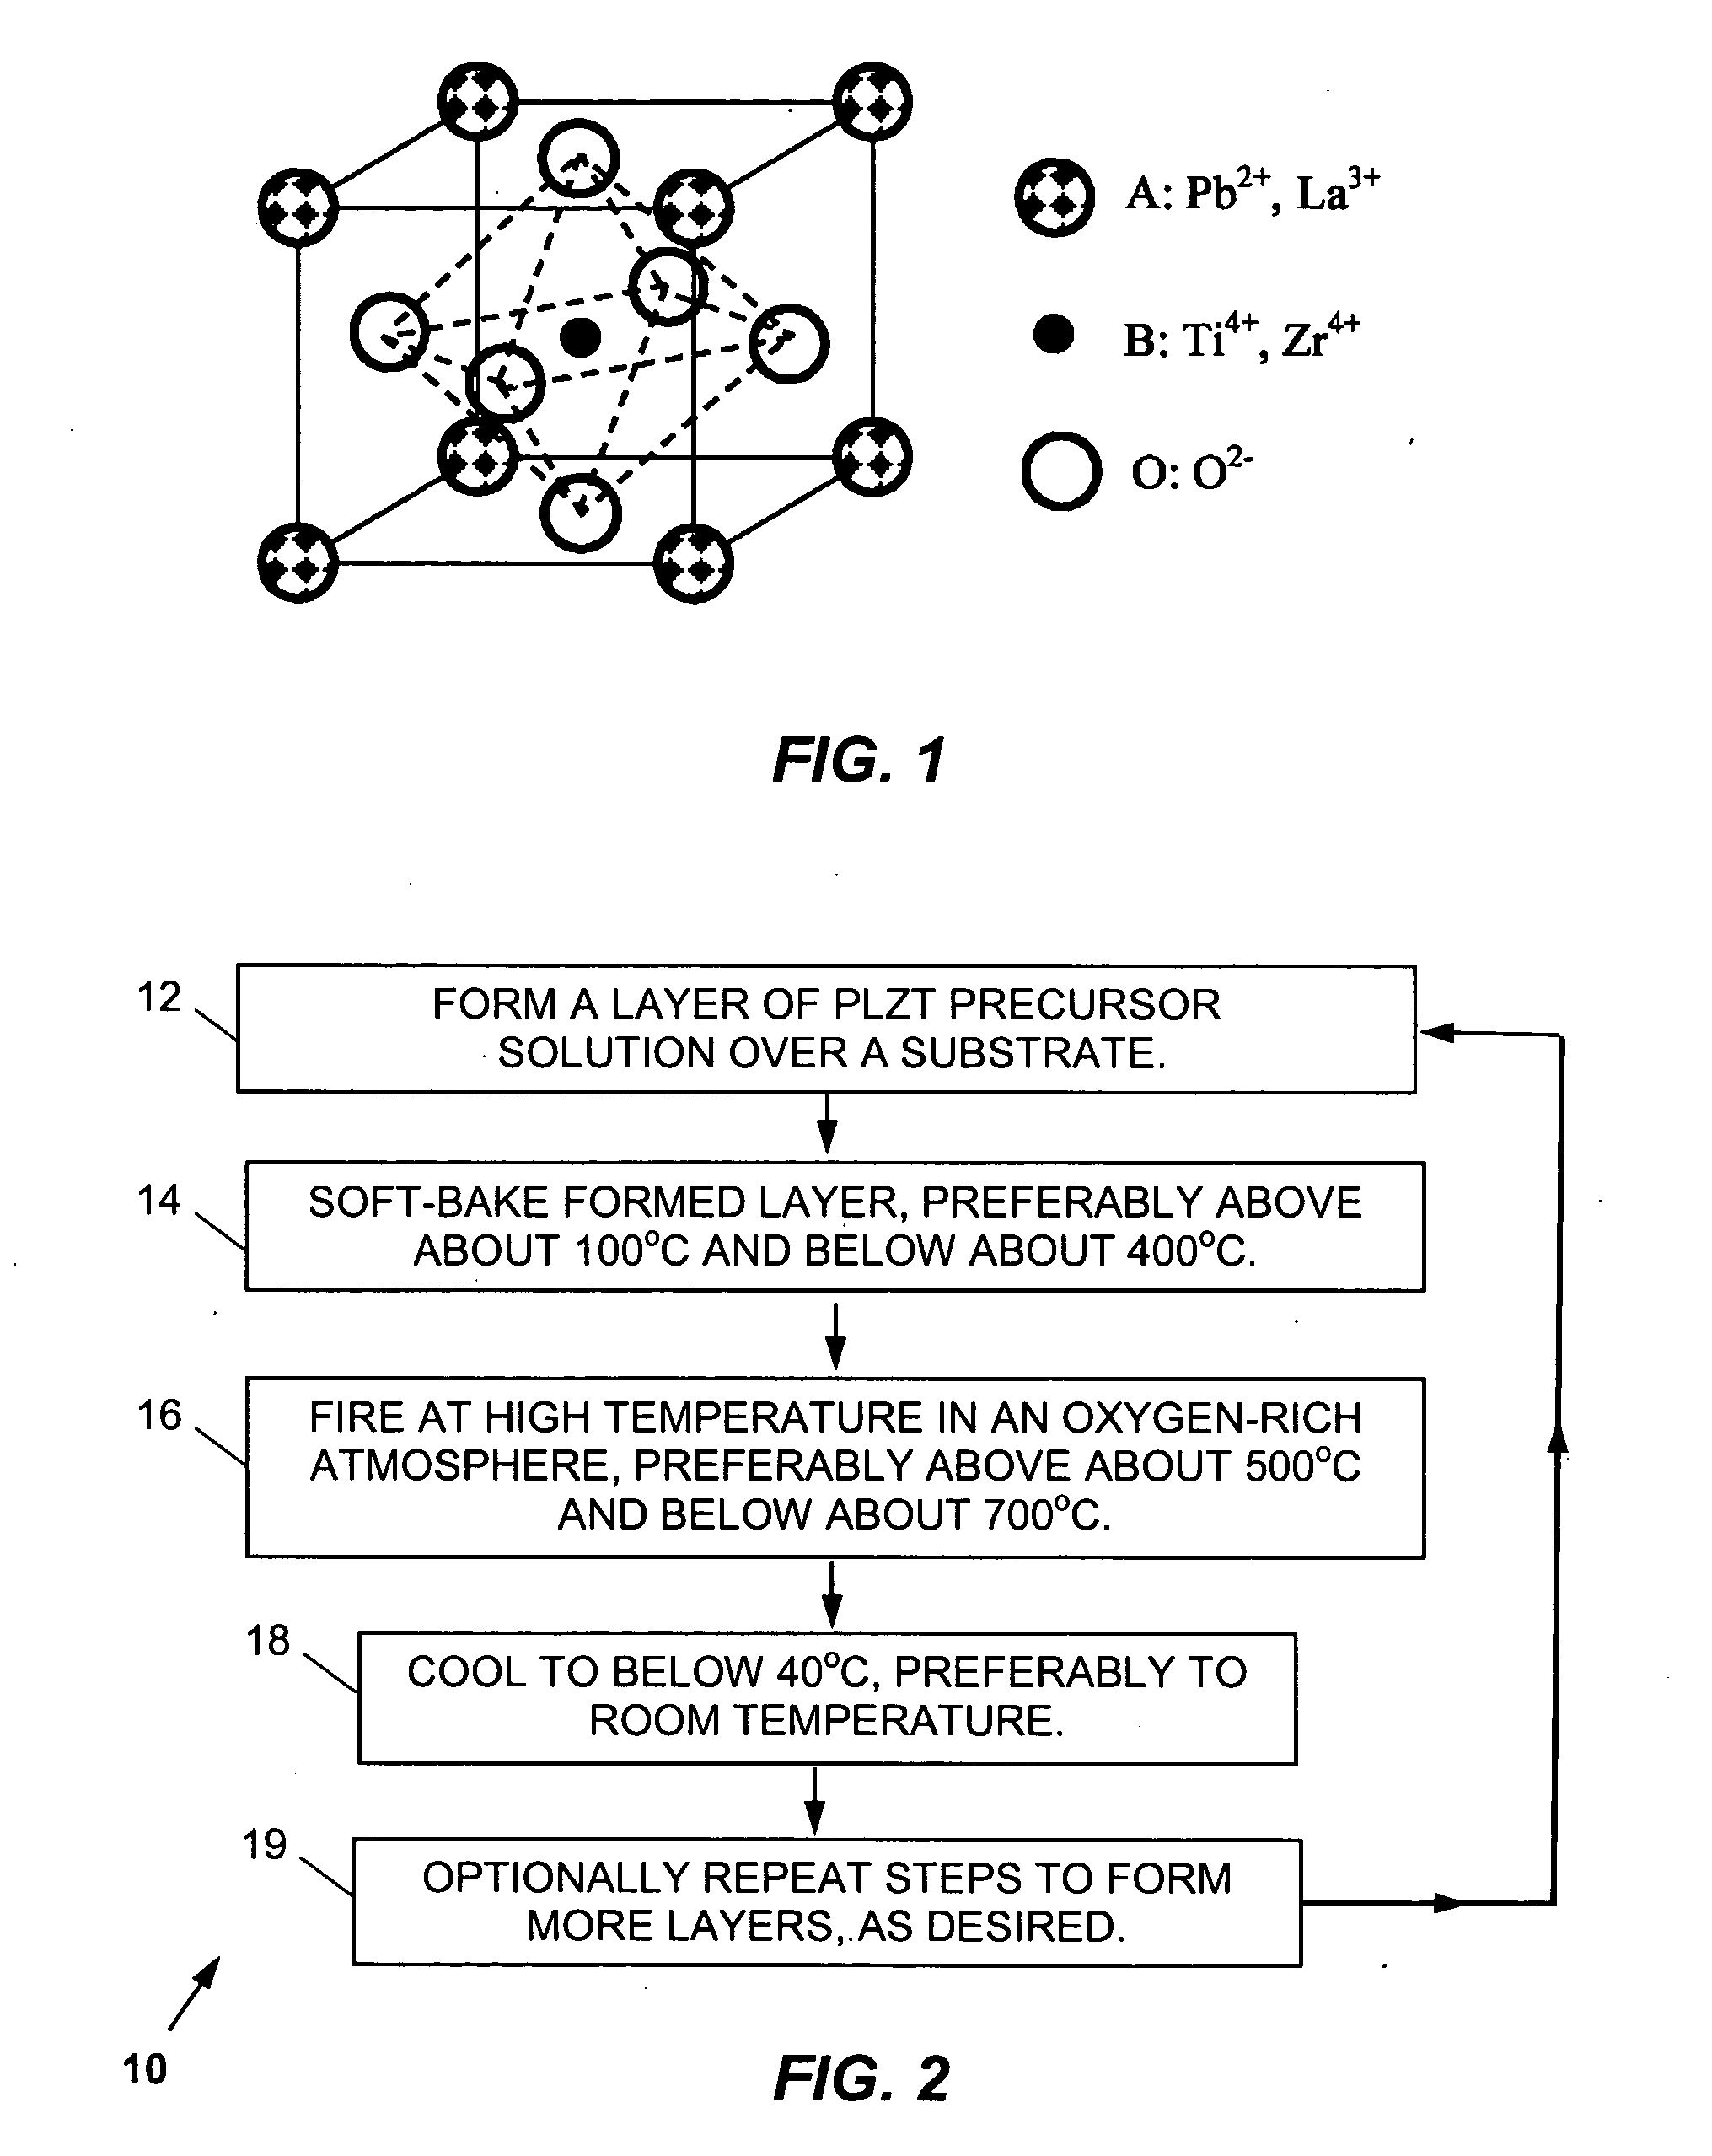 Methods of forming lanthanum-modified lead zirconium titanate (PLZT) layers, devices with PLZT layers, and precursor formation solutions